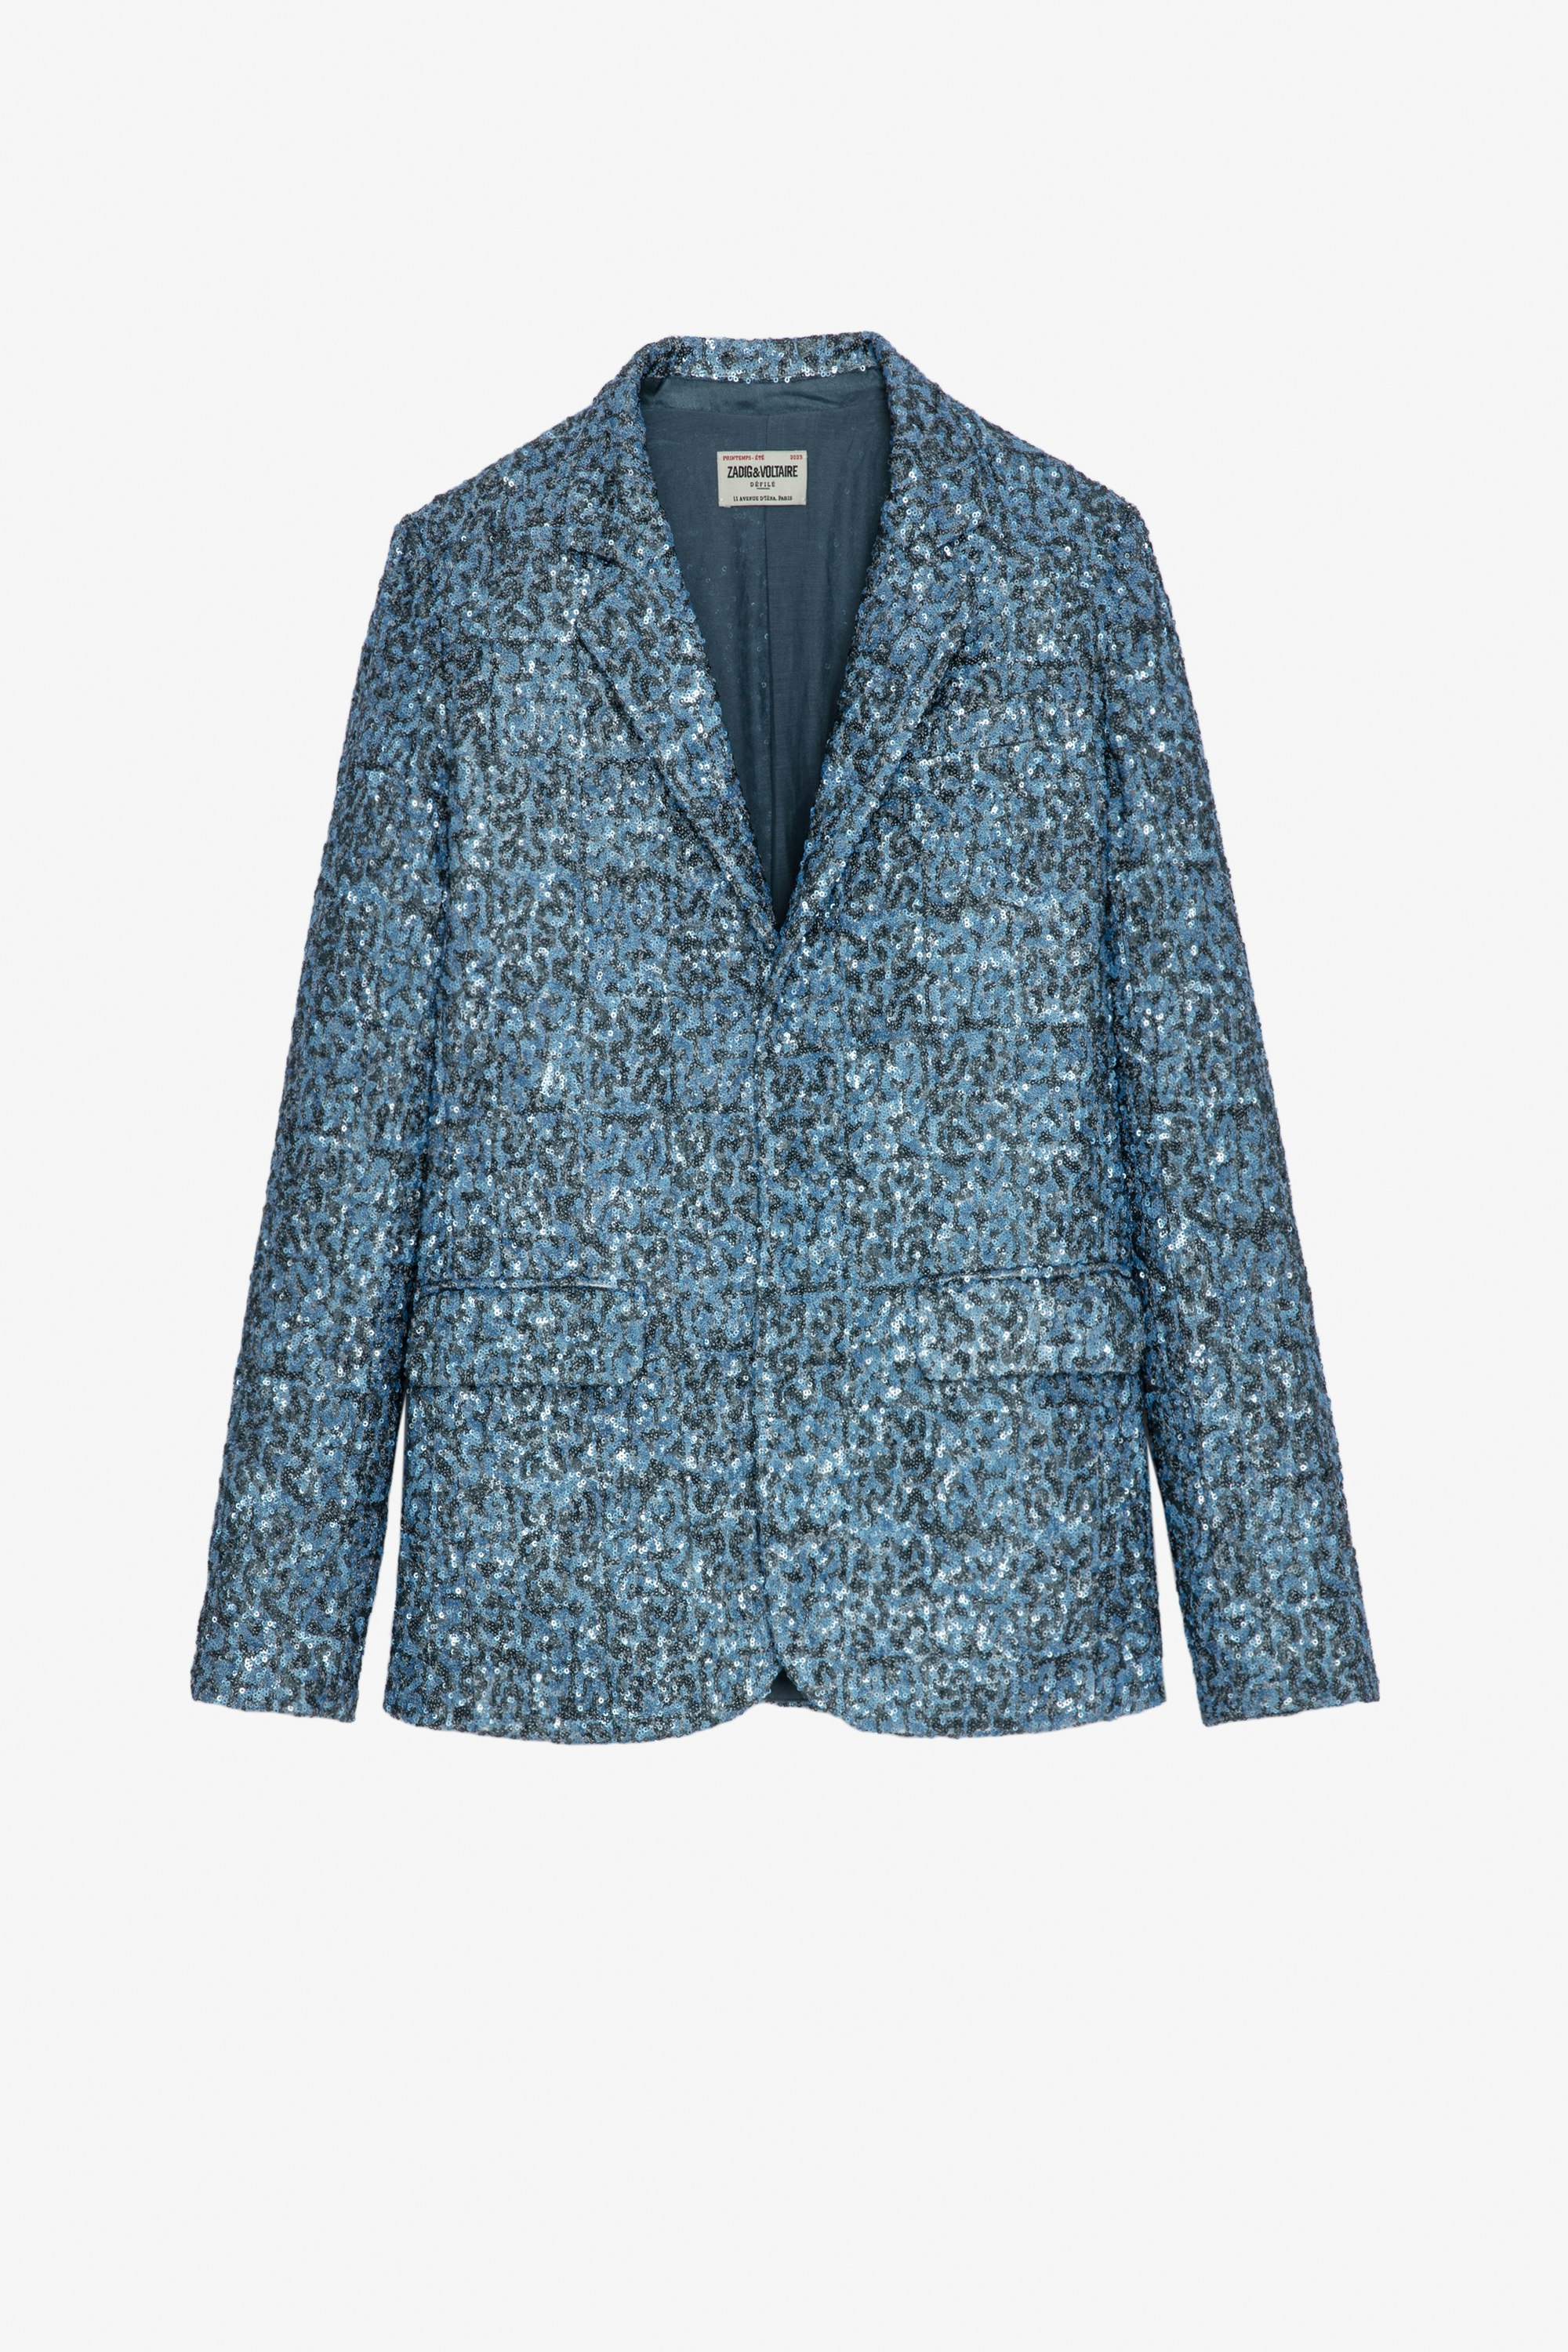 Vanille スパンコール ジャケット Women's blue tailored jacket with all-over sequins